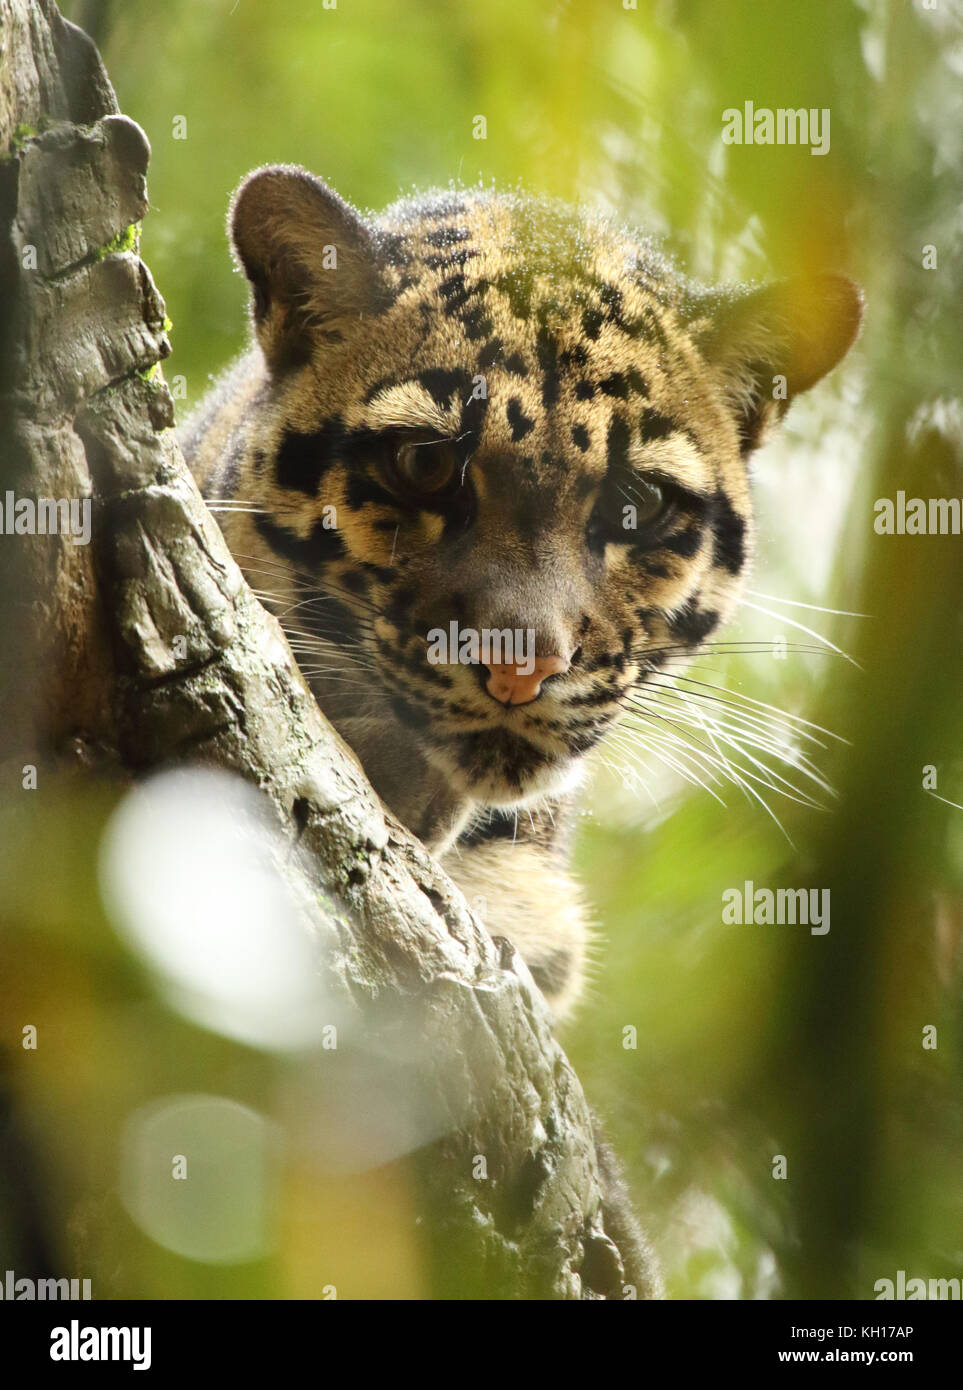 A Clouded Leopard peering down from a treetop. Stock Photo